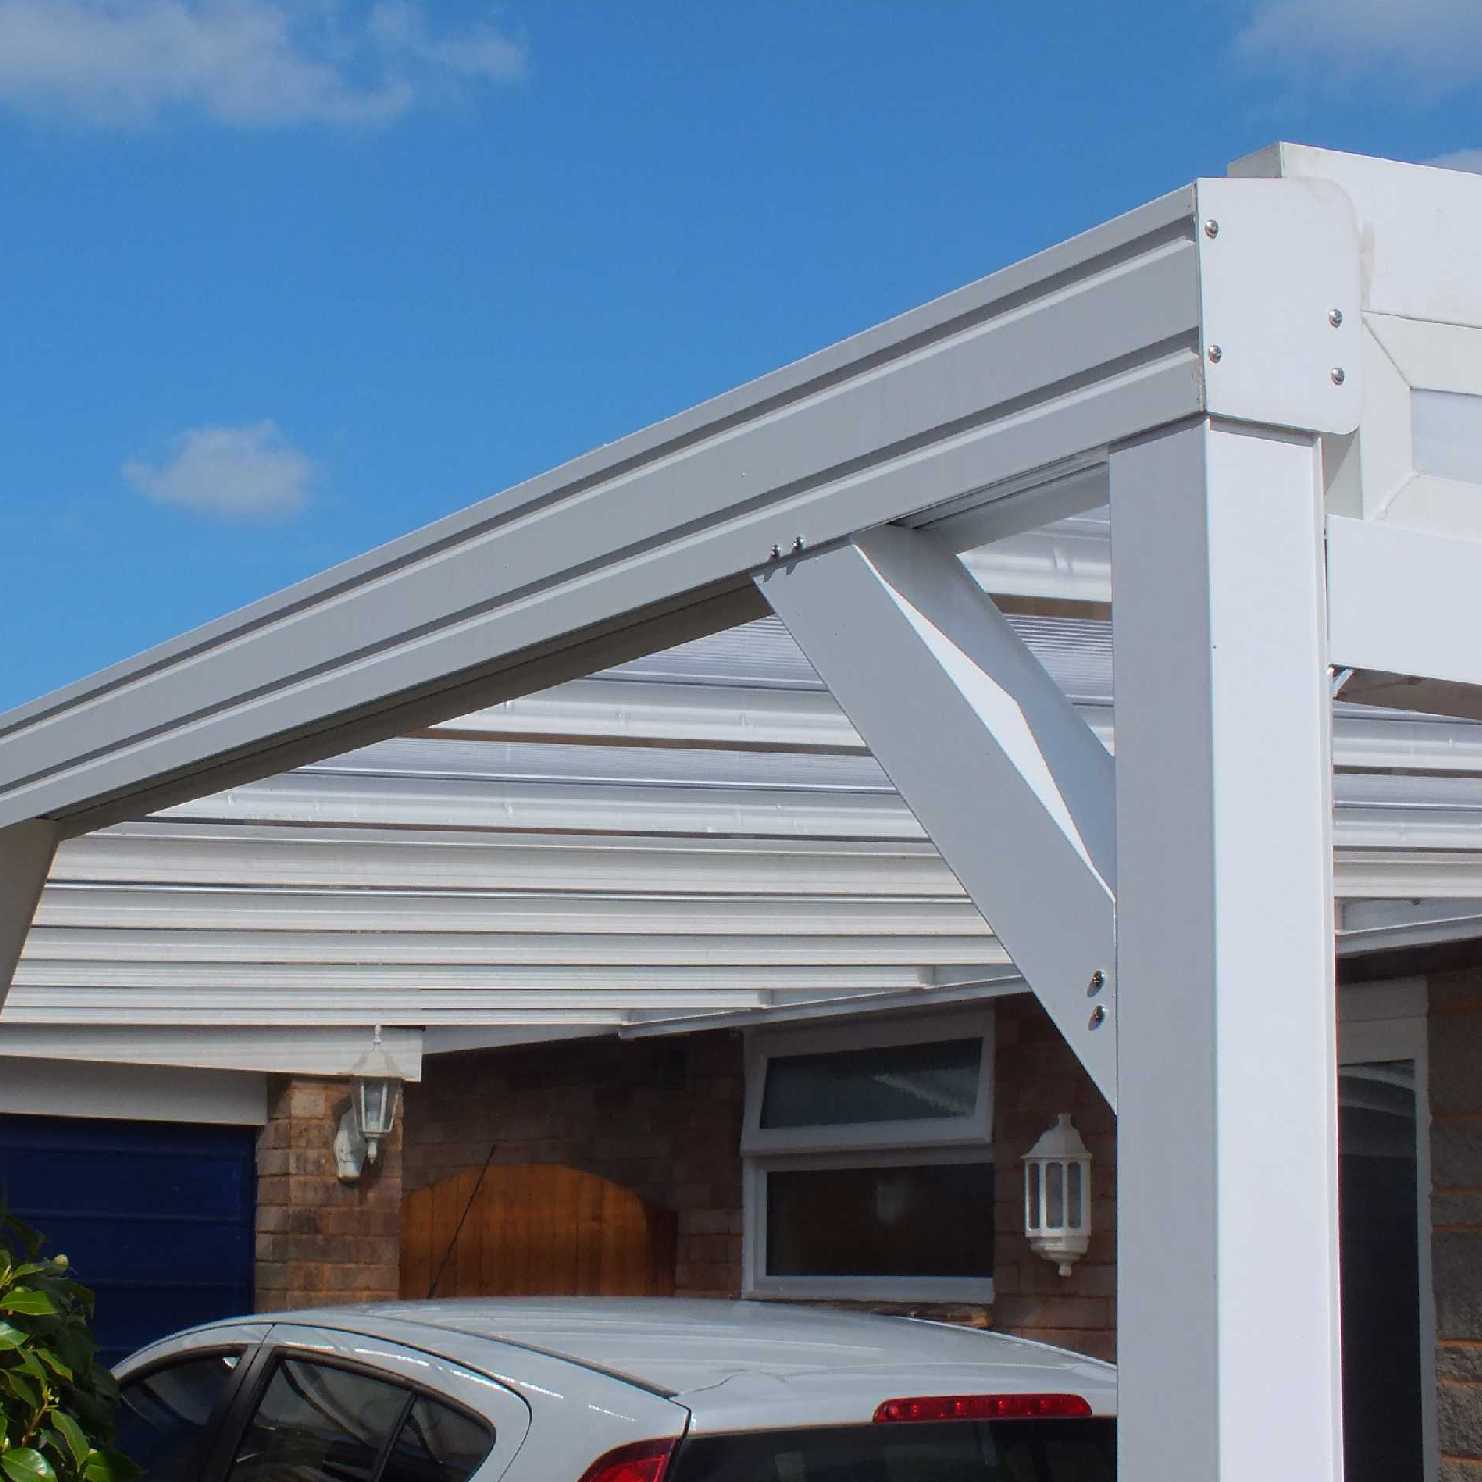 Buy Omega Smart Lean-To Canopy, White with 16mm Polycarbonate Glazing - 6.0m (W) x 3.0m (P), (3) Supporting Posts online today